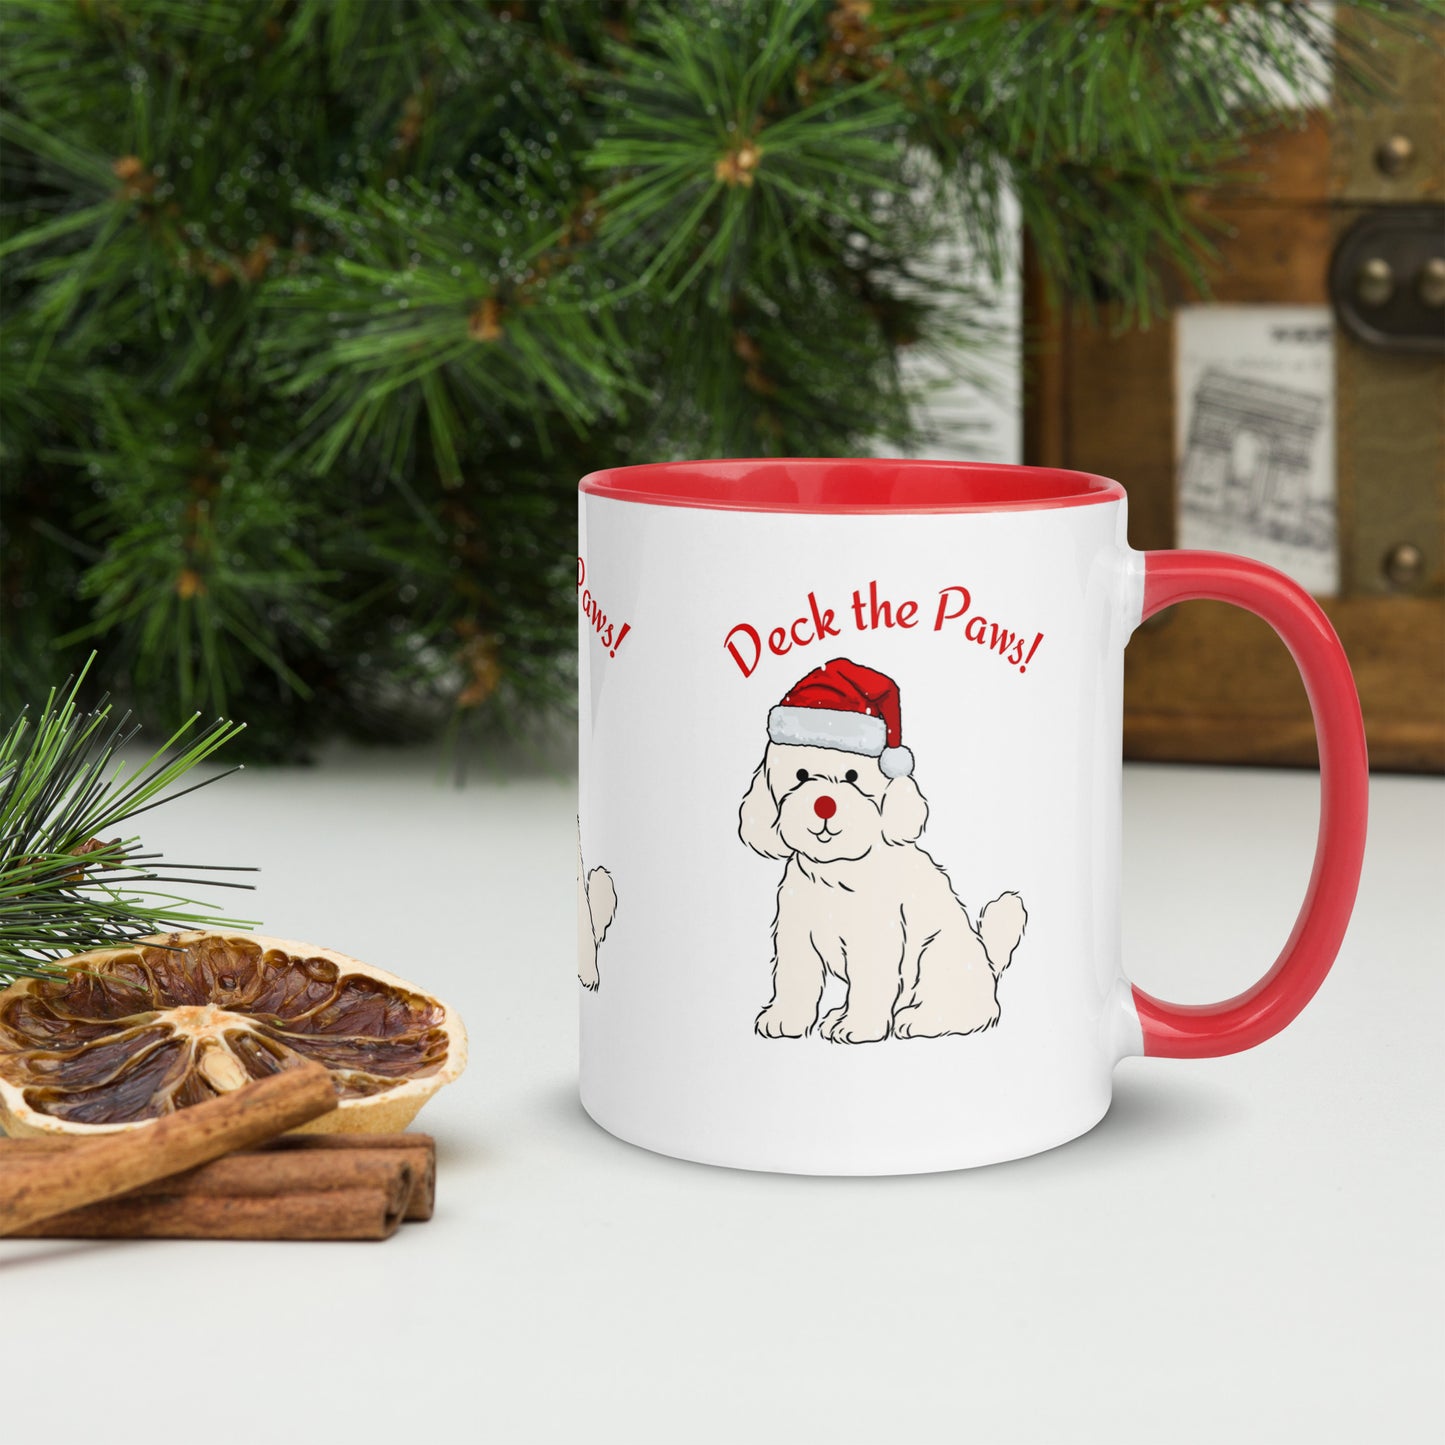 11 oz. Seasonal Drinkware Collection: 'Deck the Paws' Christmas Mug for Inspired Sips. Explore our seasonal drinkware collection, featuring the 'Deck the Paws' Christmas mug. Start your holiday season with inspired sips! 